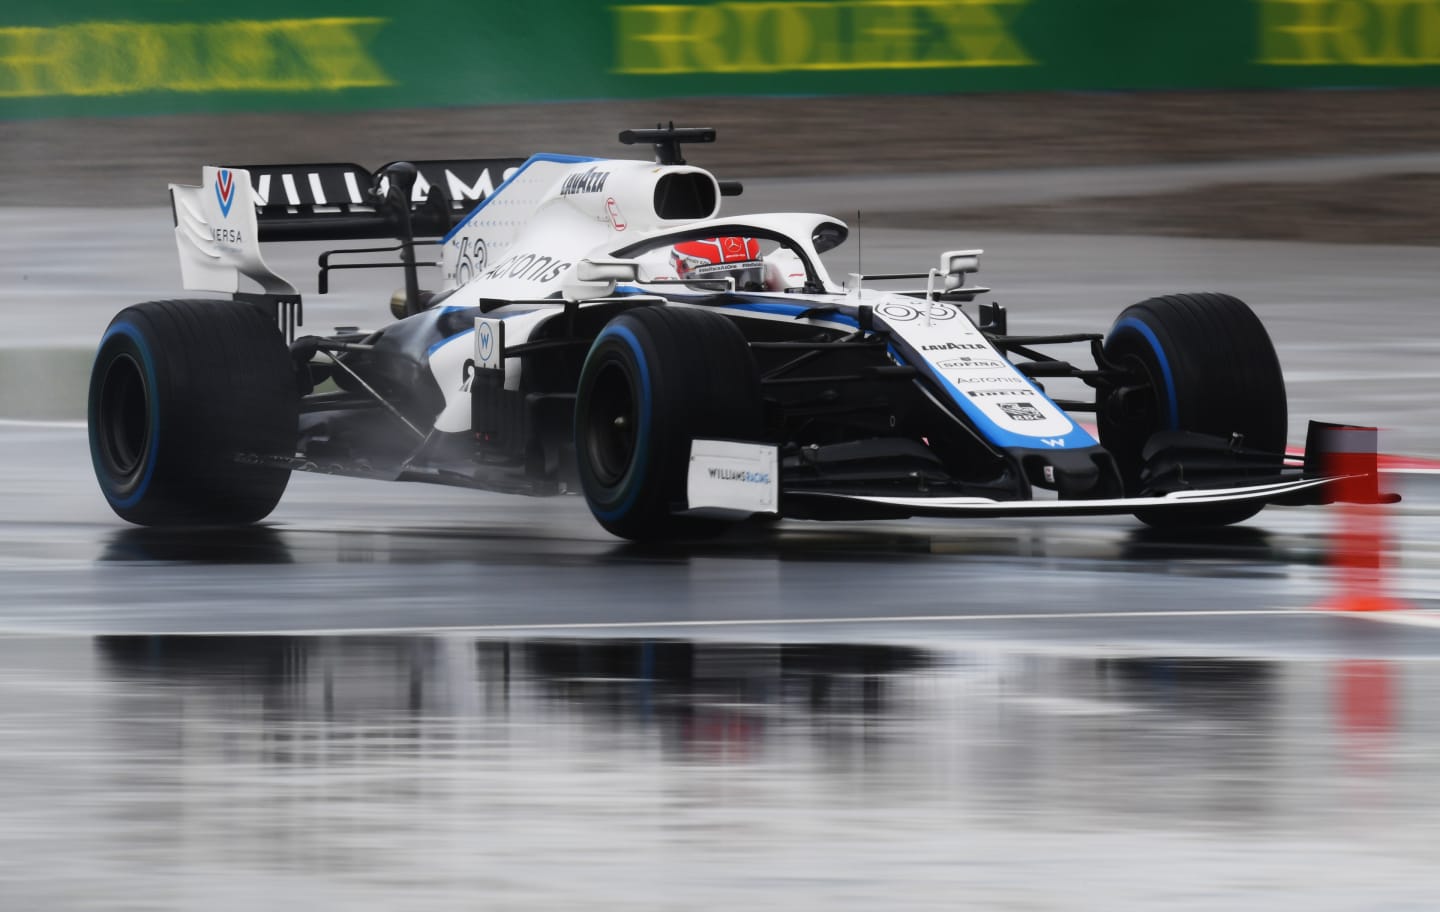 ISTANBUL, TURKEY - NOVEMBER 14: George Russell of Great Britain driving the (63) Williams Racing FW43 Mercedes on track during qualifying ahead of the F1 Grand Prix of Turkey at Intercity Istanbul Park on November 14, 2020 in Istanbul, Turkey. (Photo by Clive Mason/Getty Images)